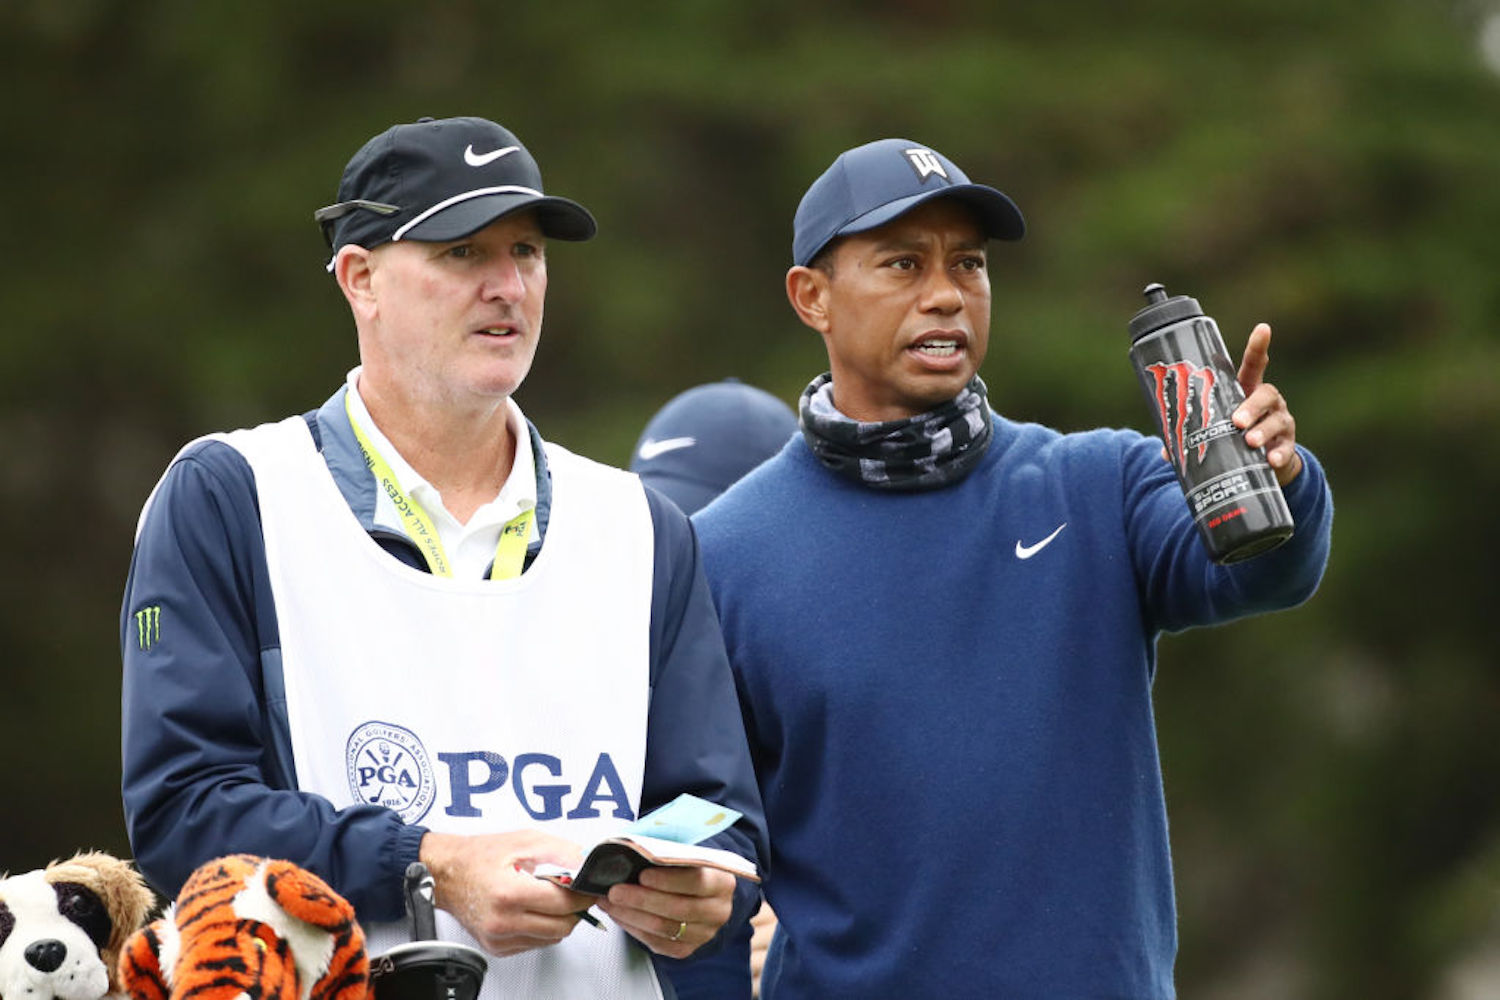 Everywhere Tiger Woods goes on a golf course, Joe LaCava follows. So, who is LaCava and how did he end up on Woods' bag?